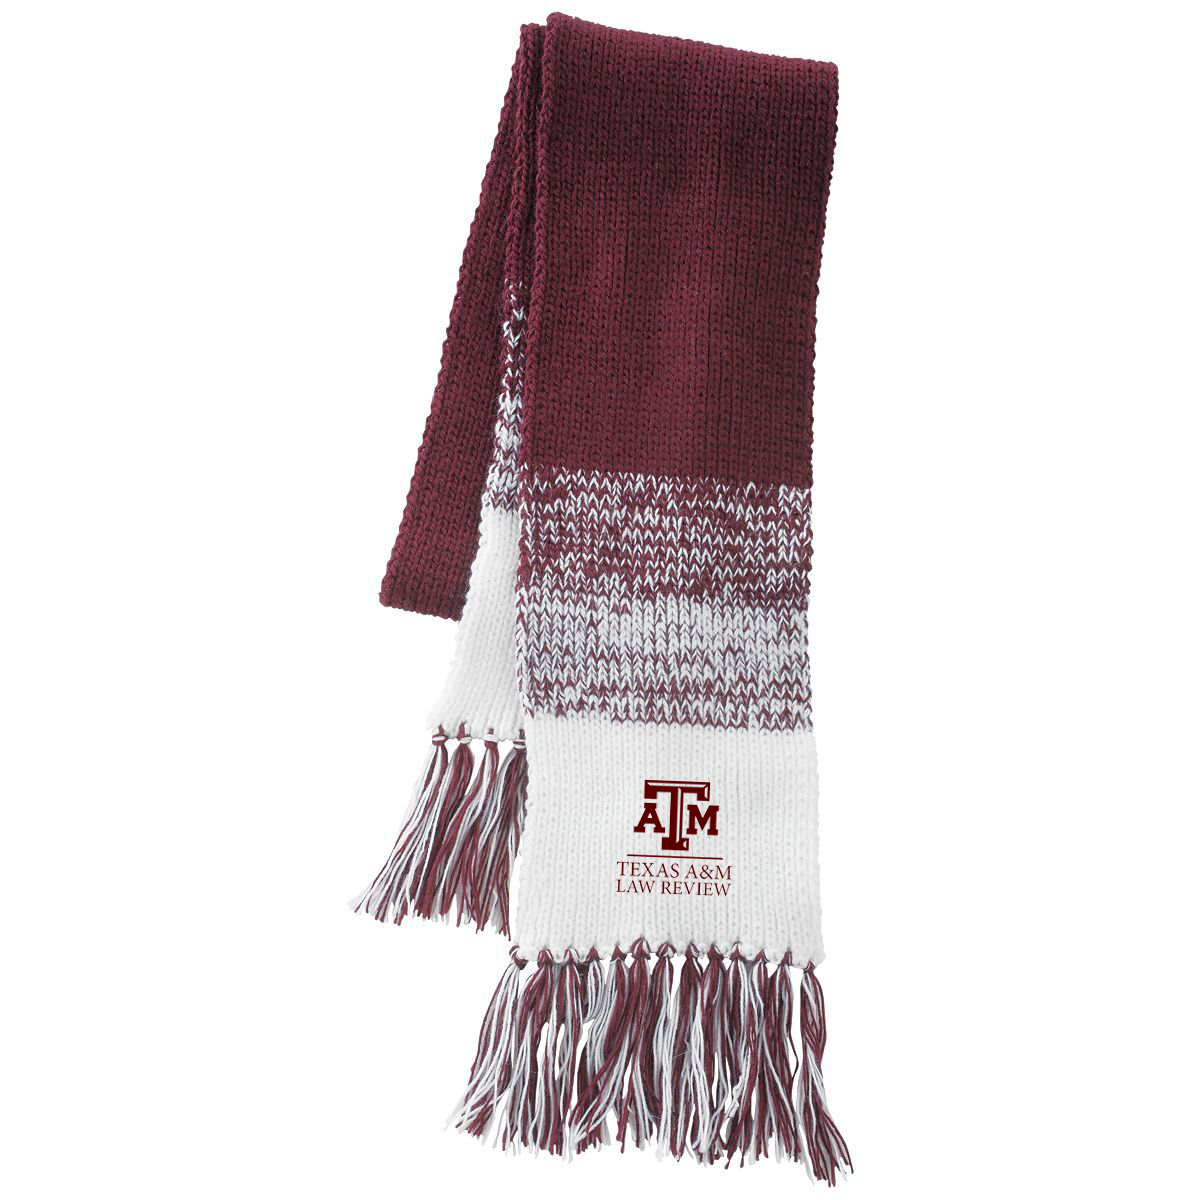 Texas A&M Law Review Ascent Scarf